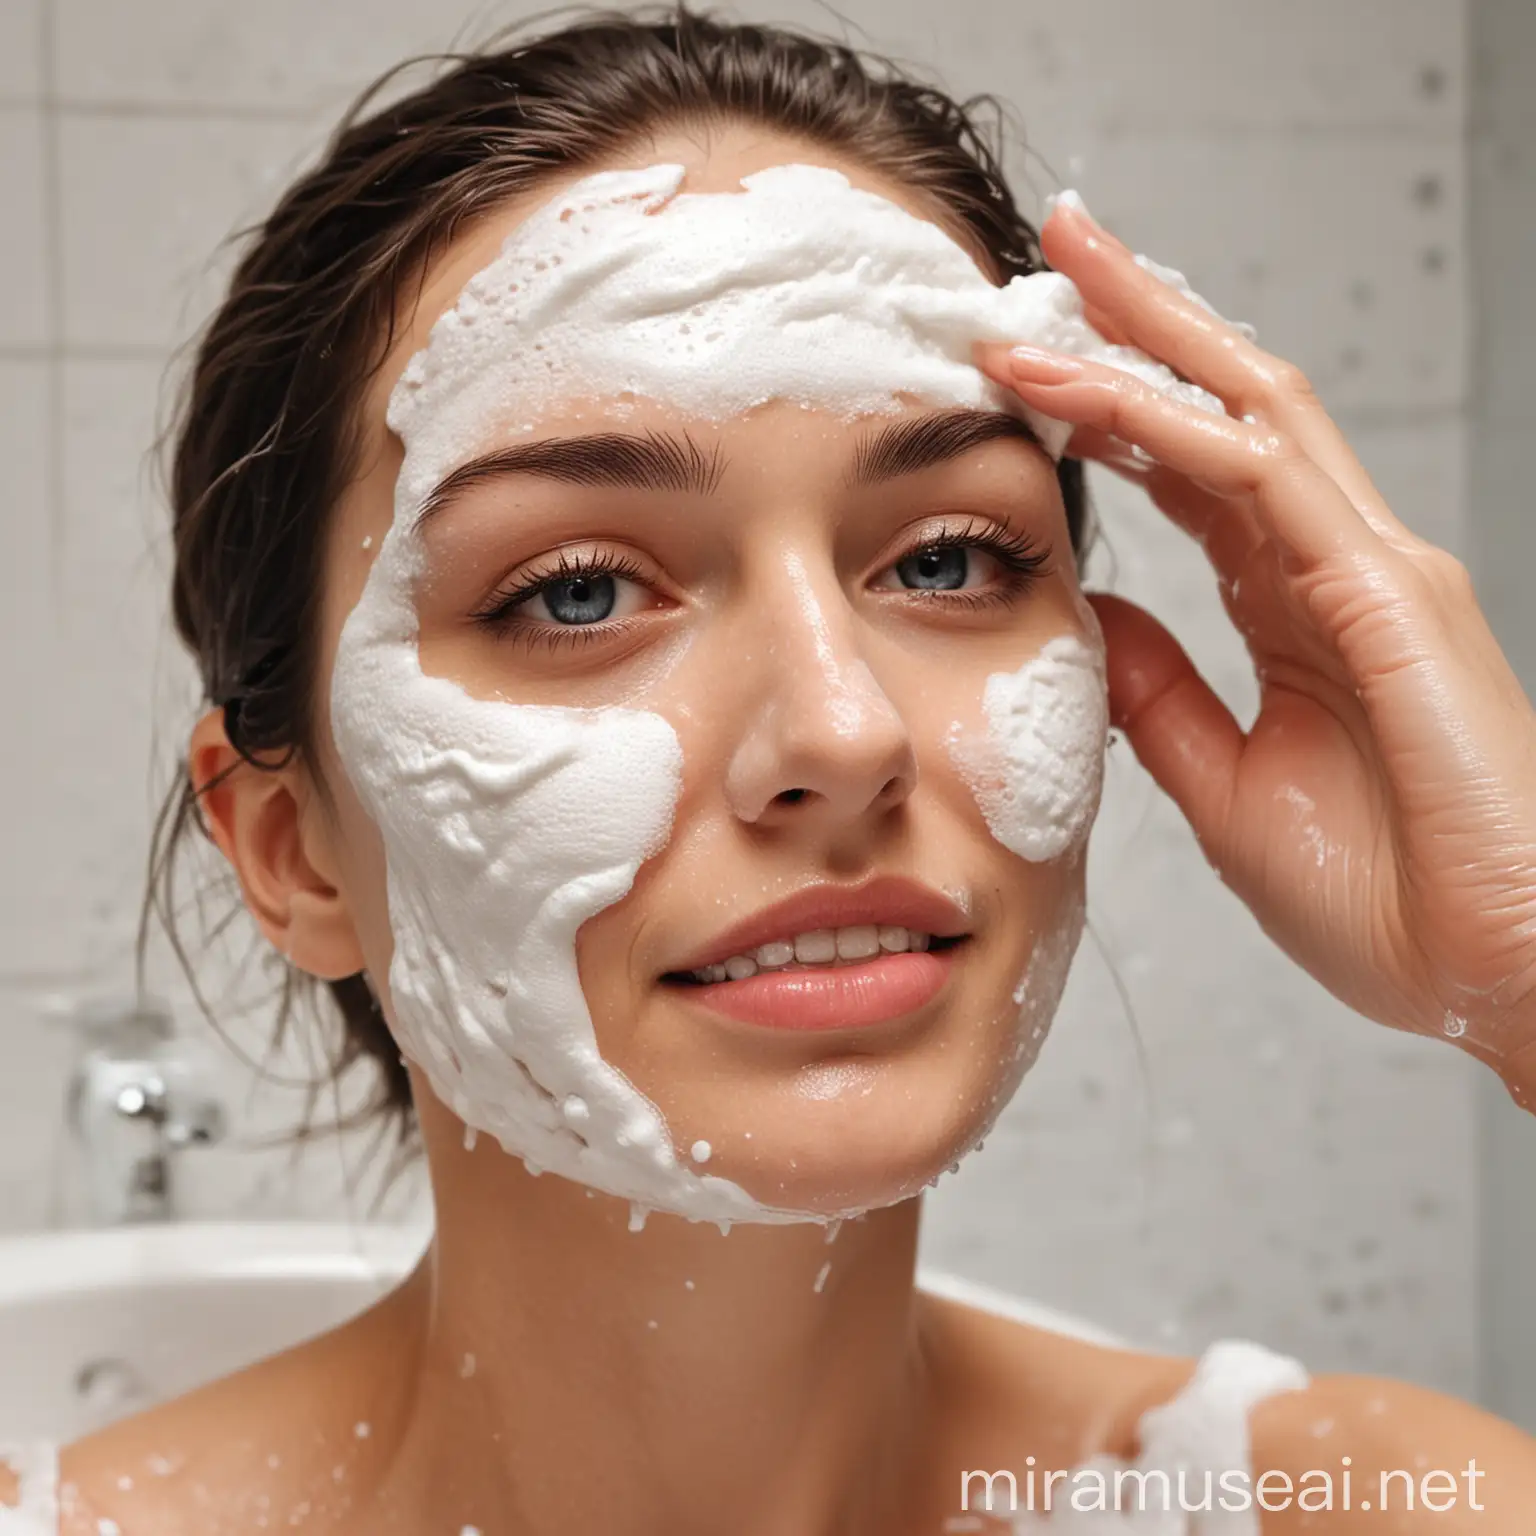 Woman Washing Face with Foamy Cleanser for Refreshing Skincare Routine